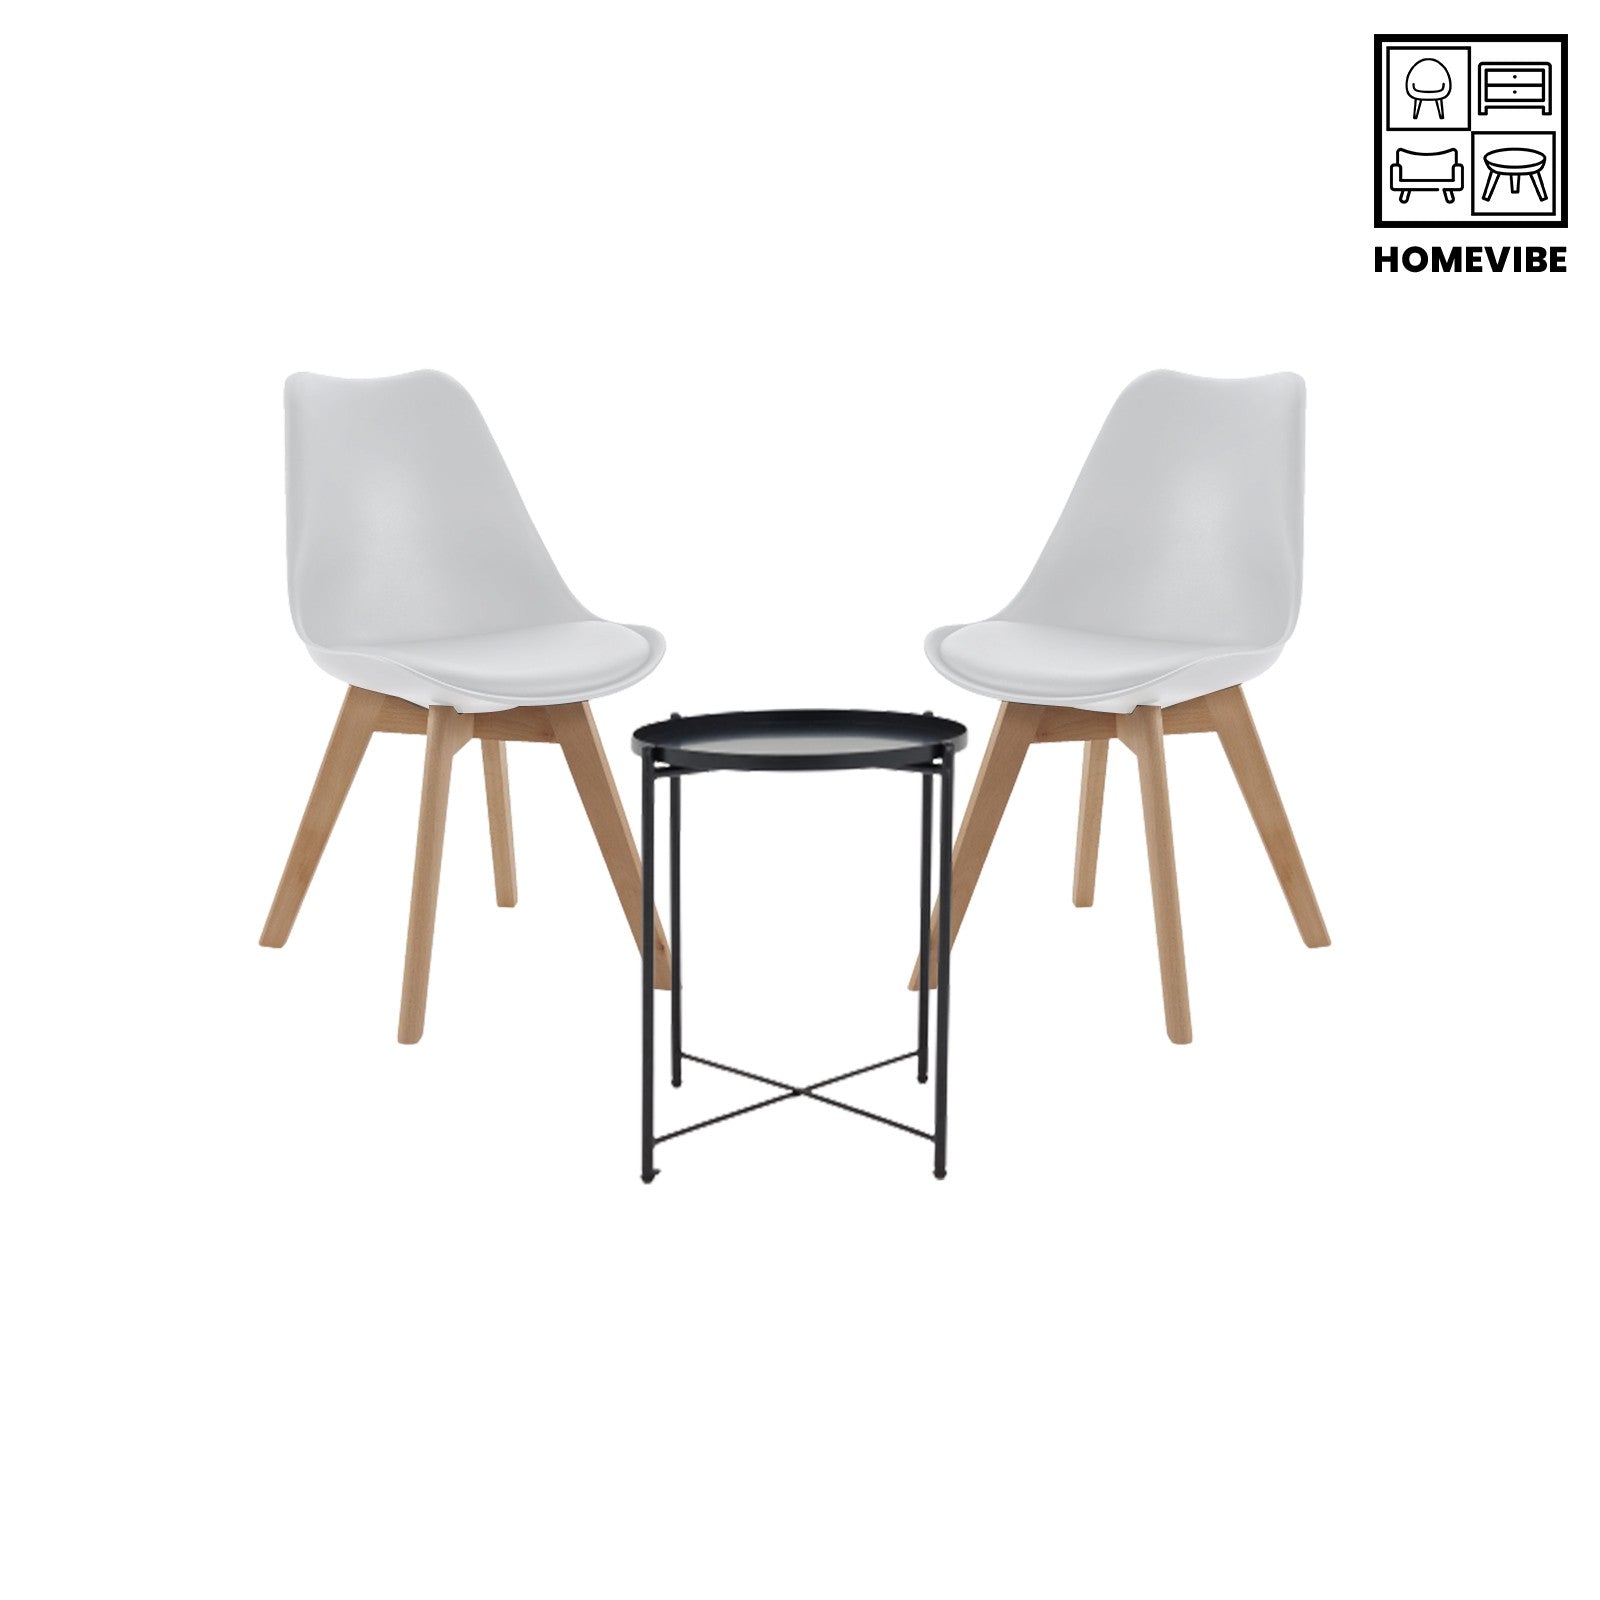 HV Cassie Steel Coffee Table + 2 Padded Chair Set | HomeVibe PH | Buy Online Furniture and Home Furnishings